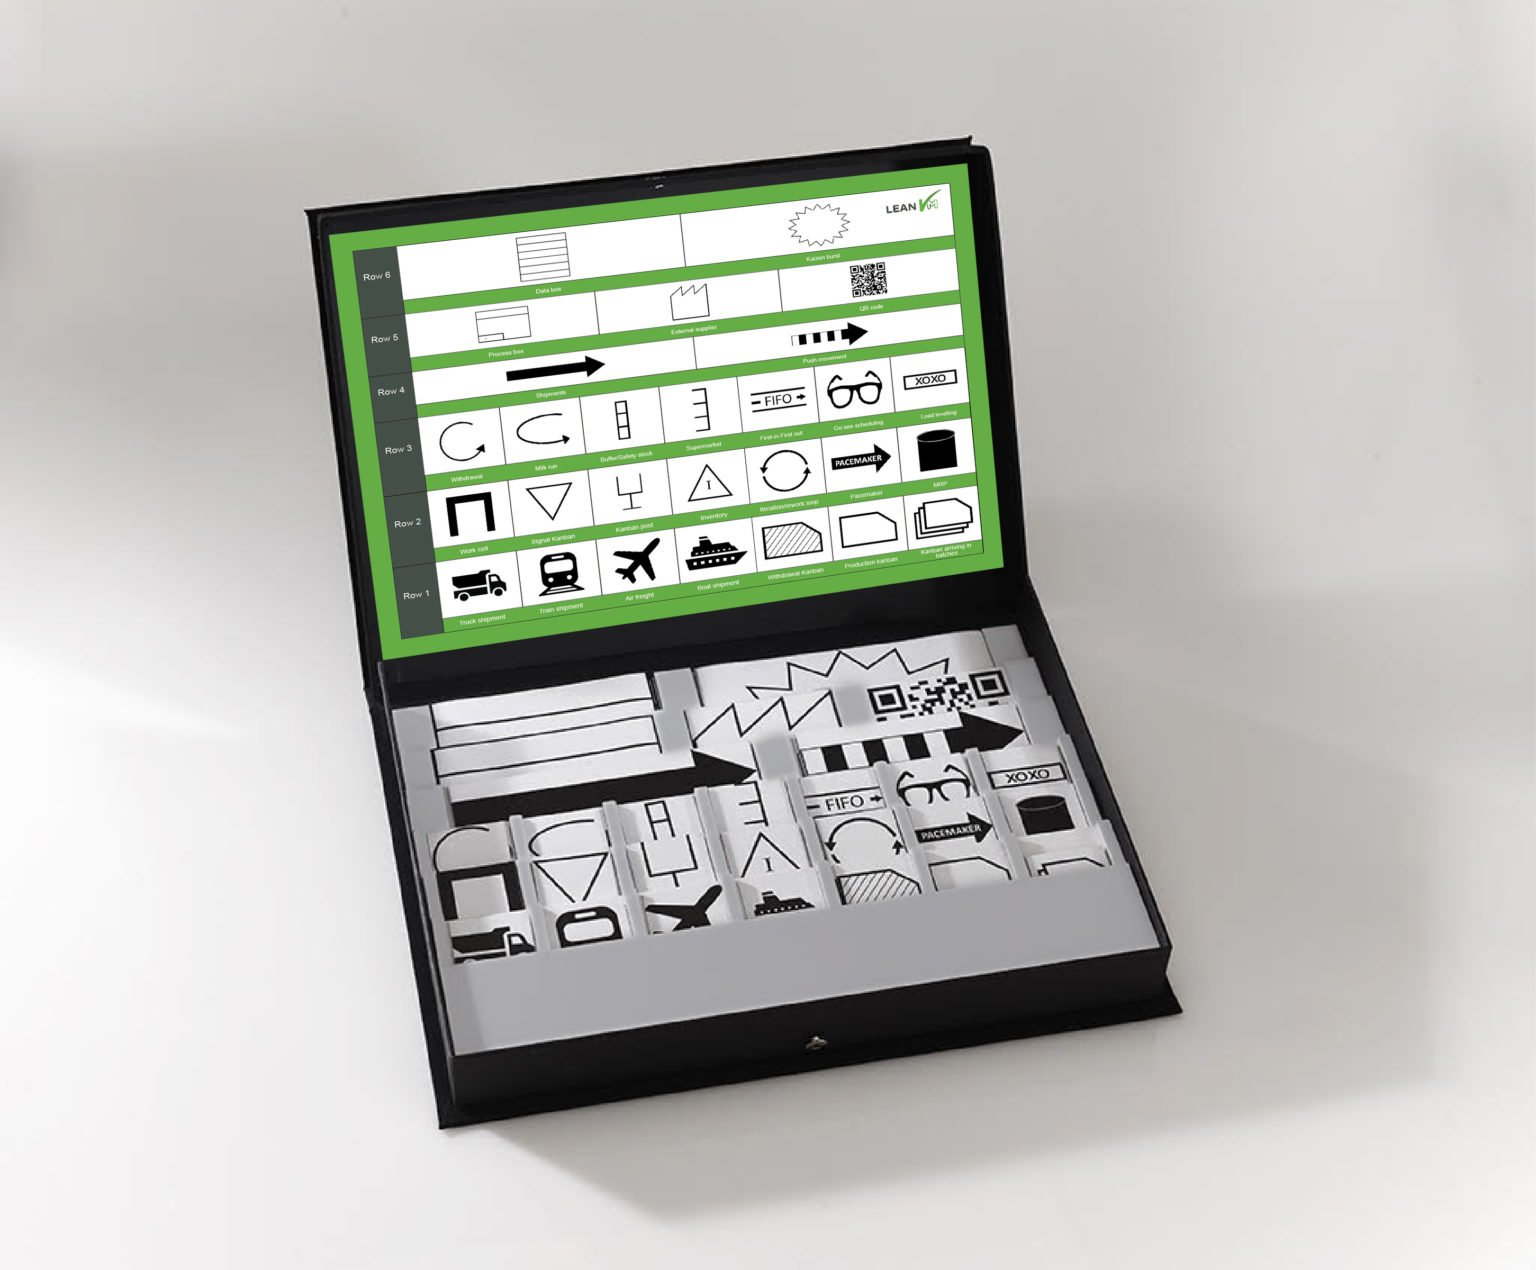 Value Stream Mapping Kit with 108 magnetic printed icons